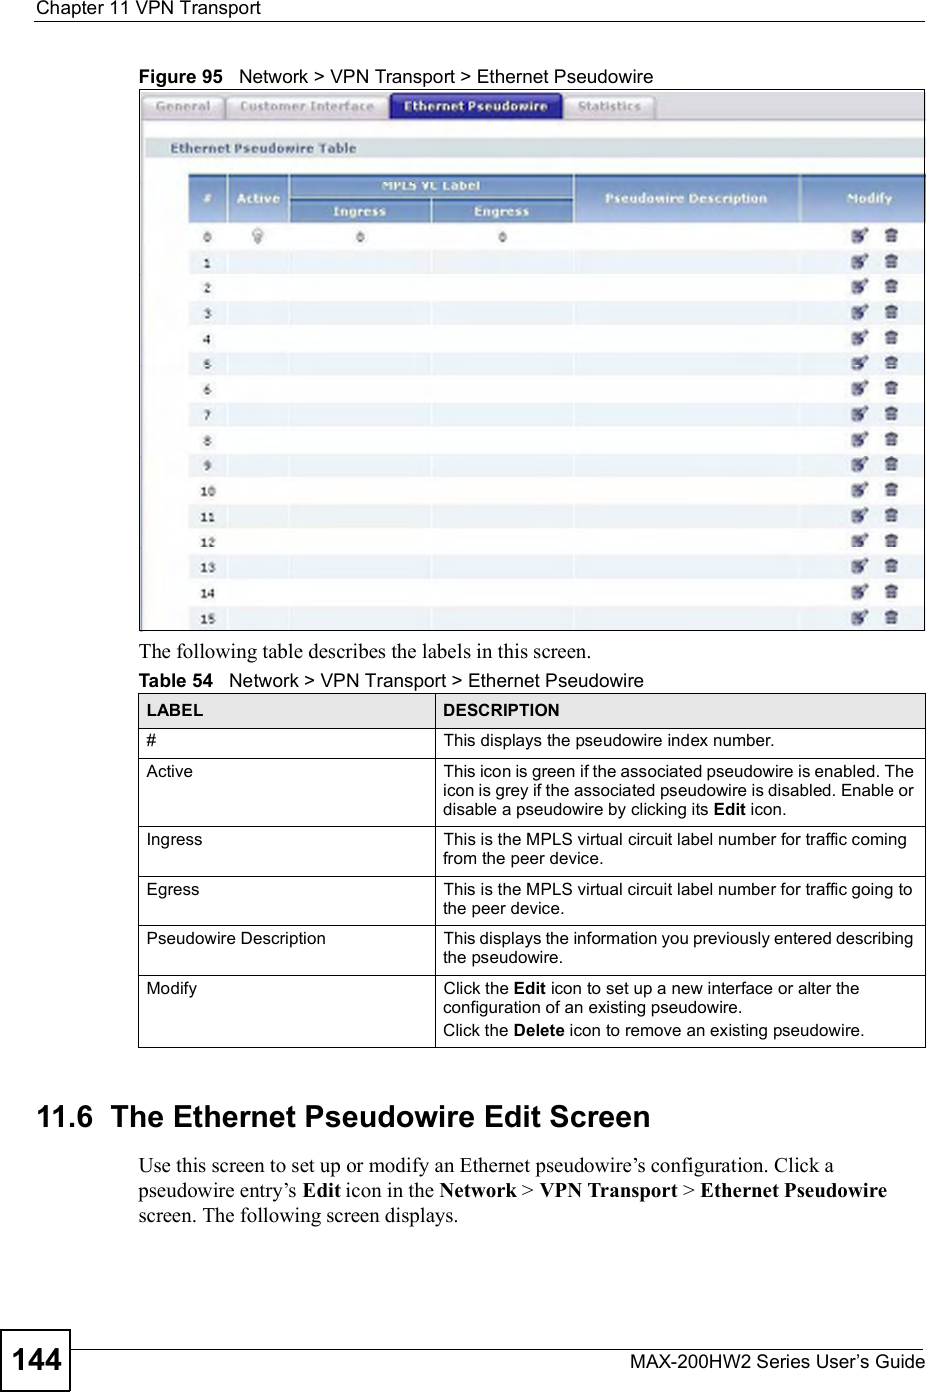 Chapter 11VPN TransportMAX-200HW2 Series User s Guide144Figure 95   Network &gt; VPN Transport &gt; Ethernet PseudowireThe following table describes the labels in this screen.11.6  The Ethernet Pseudowire Edit ScreenUse this screen to set up or modify an Ethernet pseudowire!s configuration. Click a pseudowire entry!s Edit icon in the Network &gt; VPN Transport &gt;Ethernet Pseudowirescreen. The following screen displays.Table 54   Network &gt; VPN Transport &gt; Ethernet PseudowireLABEL DESCRIPTION#This displays the pseudowire index number.ActiveThis icon is green if the associated pseudowire is enabled. The icon is grey if the associated pseudowire is disabled. Enable or disable a pseudowire by clicking its Edit icon.IngressThis is the MPLS virtual circuit label number for traffic coming from the peer device.EgressThis is the MPLS virtual circuit label number for traffic going to the peer device.Pseudowire DescriptionThis displays the information you previously entered describing the pseudowire. ModifyClick the Edit icon to set up a new interface or alter the configuration of an existing pseudowire.Click the Delete icon to remove an existing pseudowire. 